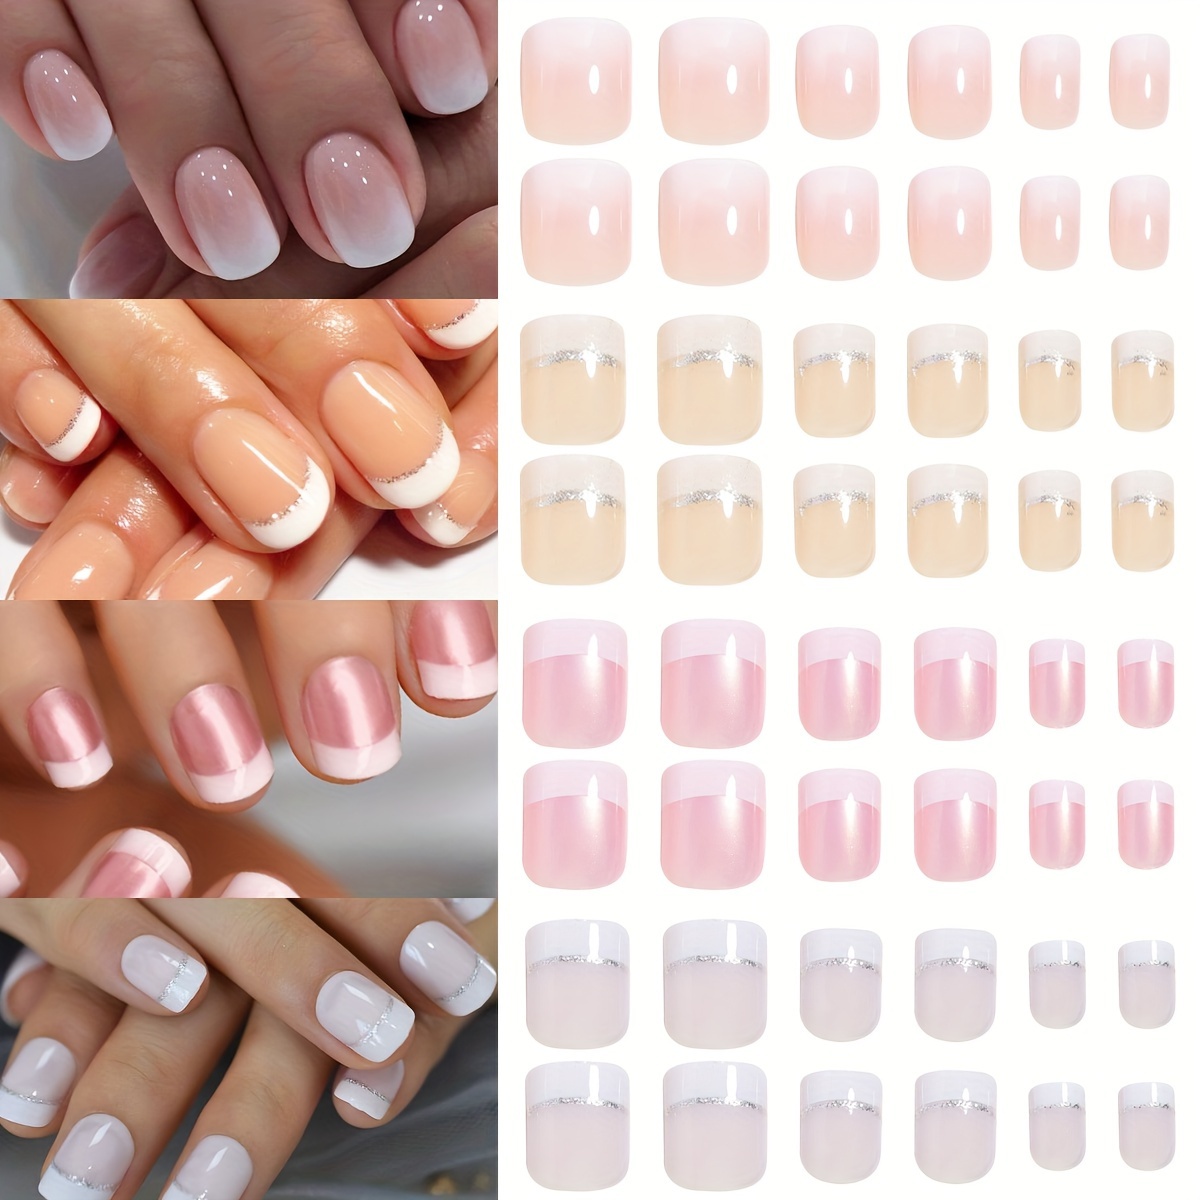 

96-piece French Gradient Press-on Nails Set - 4 Shades, Glossy Finish, Short Square False Nails For Women & Girls